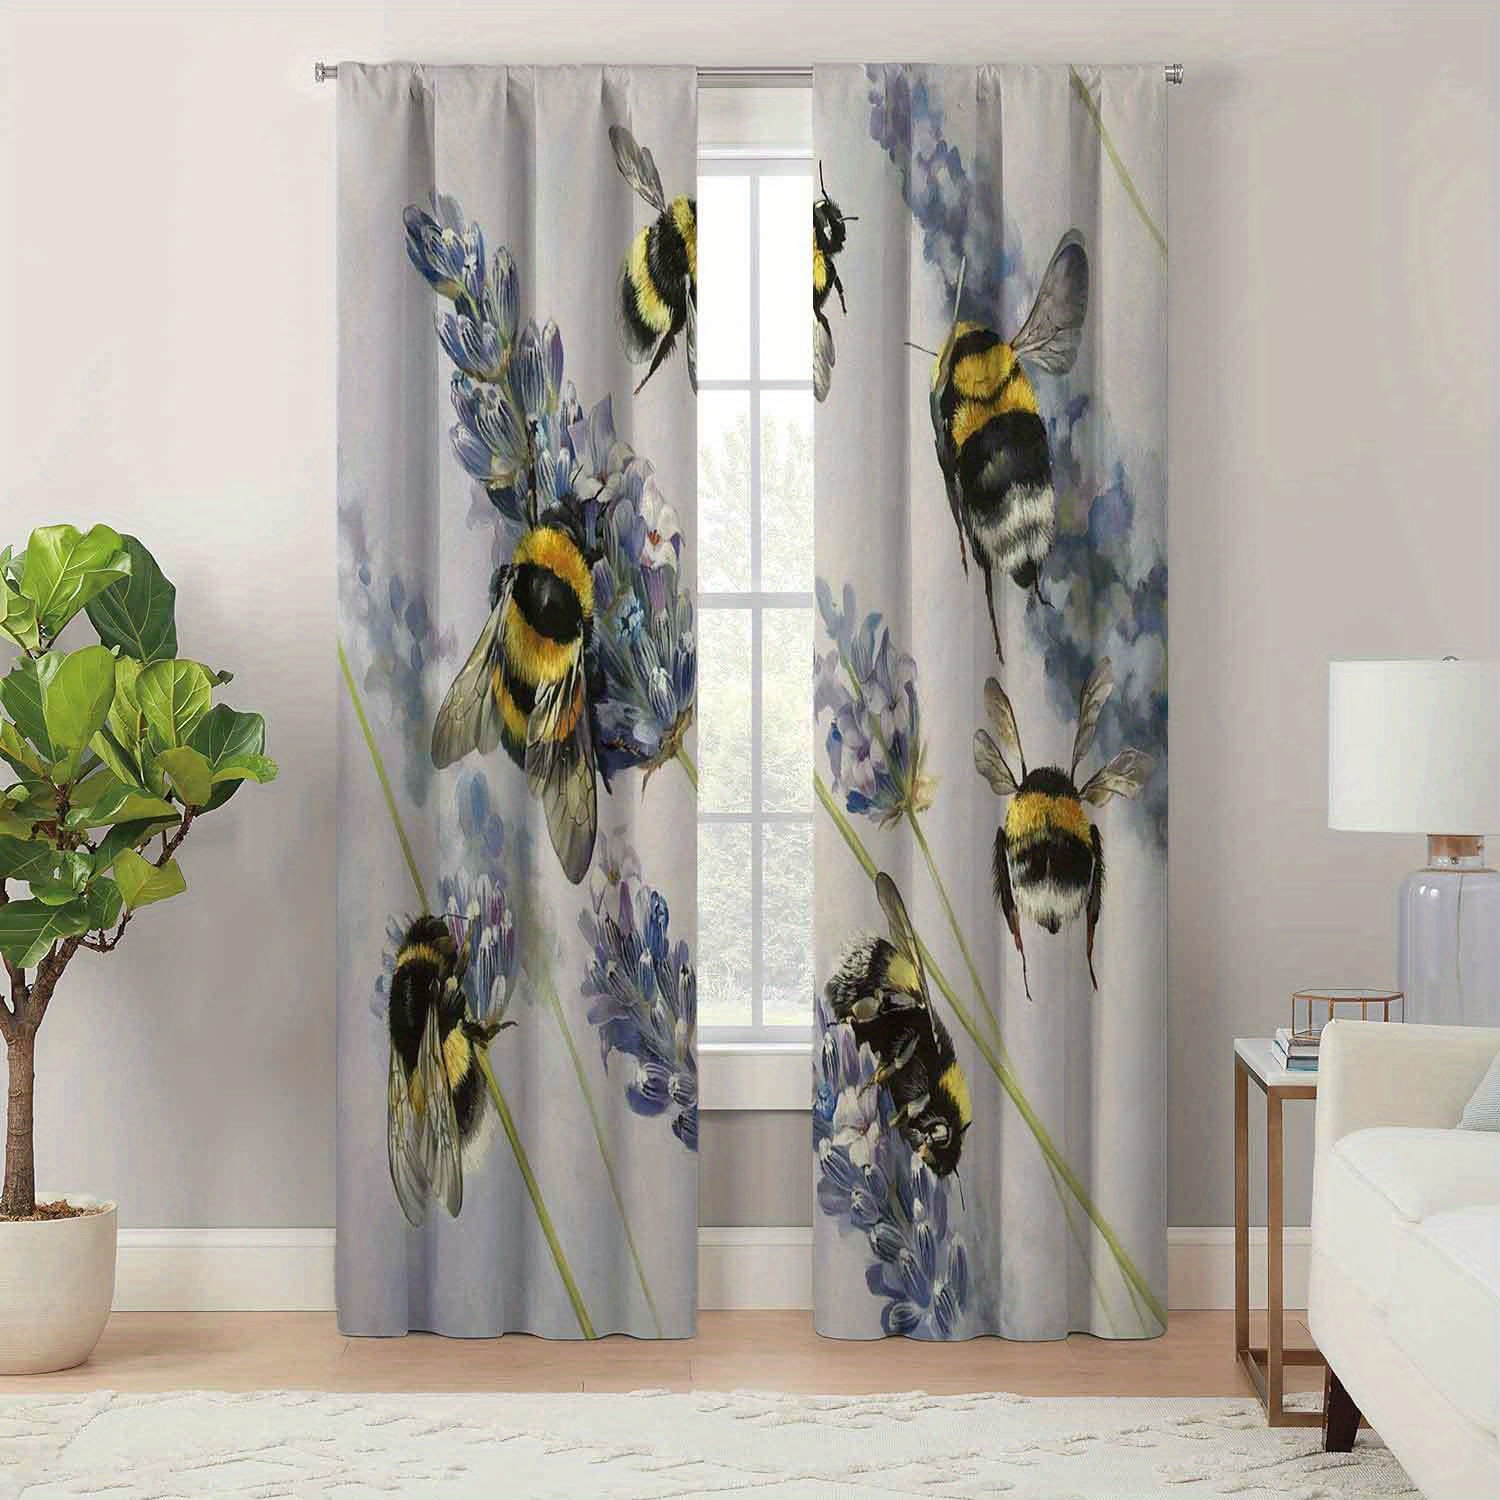 

Modern Jacquard Bee Printed Curtain Set - Pastoral Charm Easy Maintenance, Durable Polyester For Bedroom And Living Room - Includes Tie Back, Machine Washable Boho Style